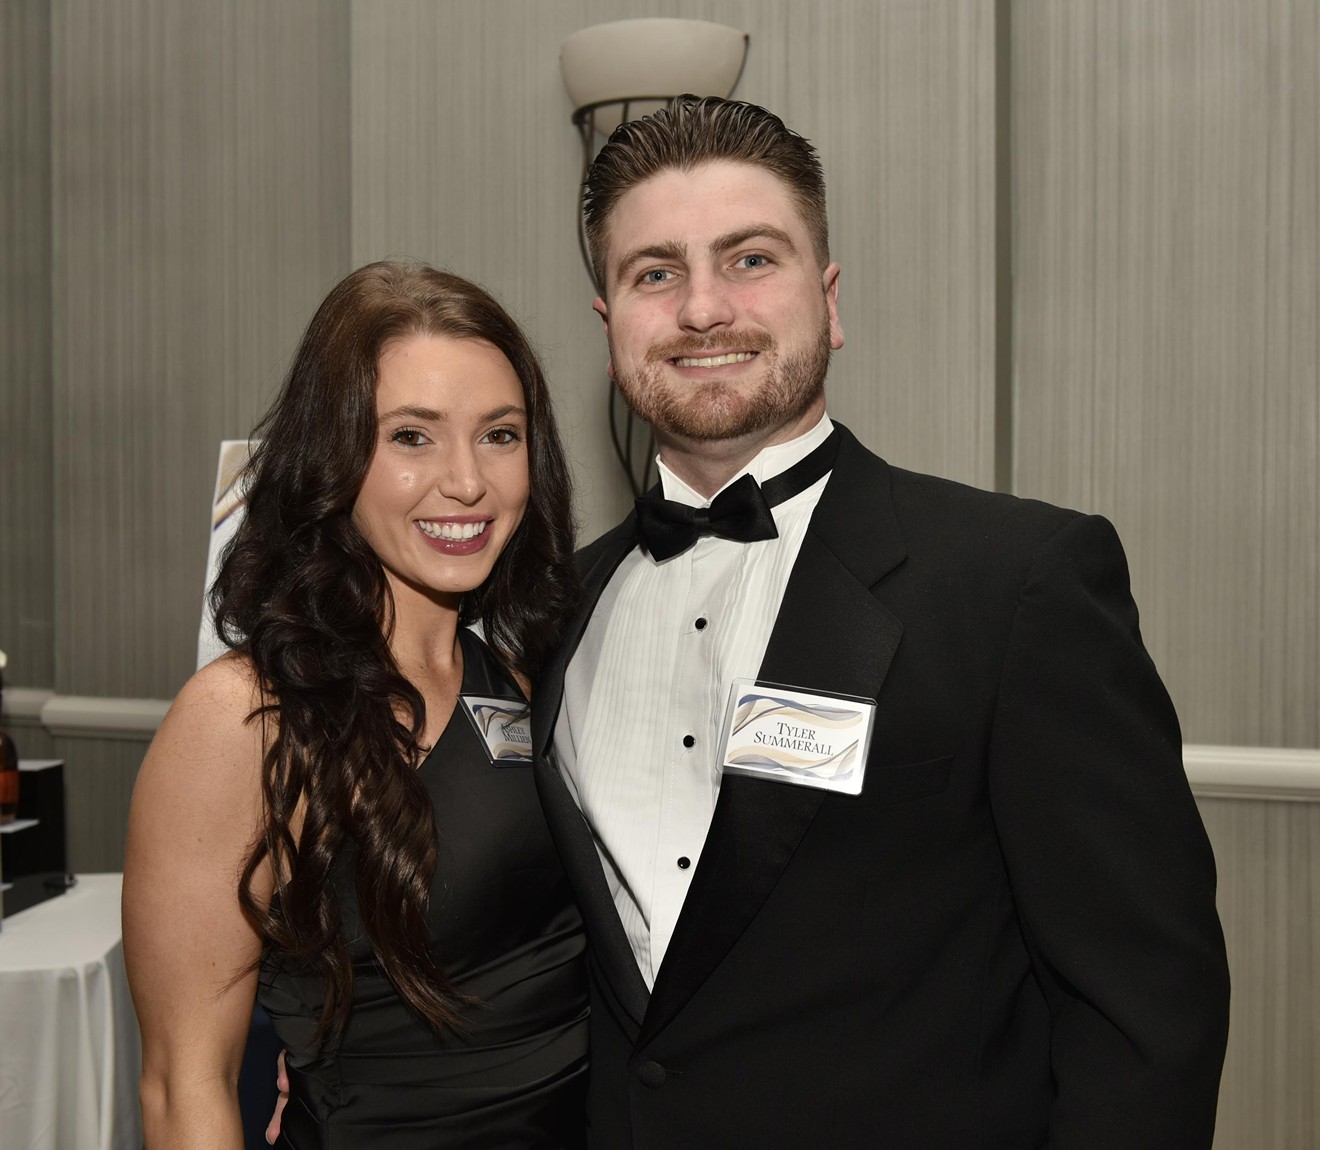 Georgia Southern Parker College of Business Gala